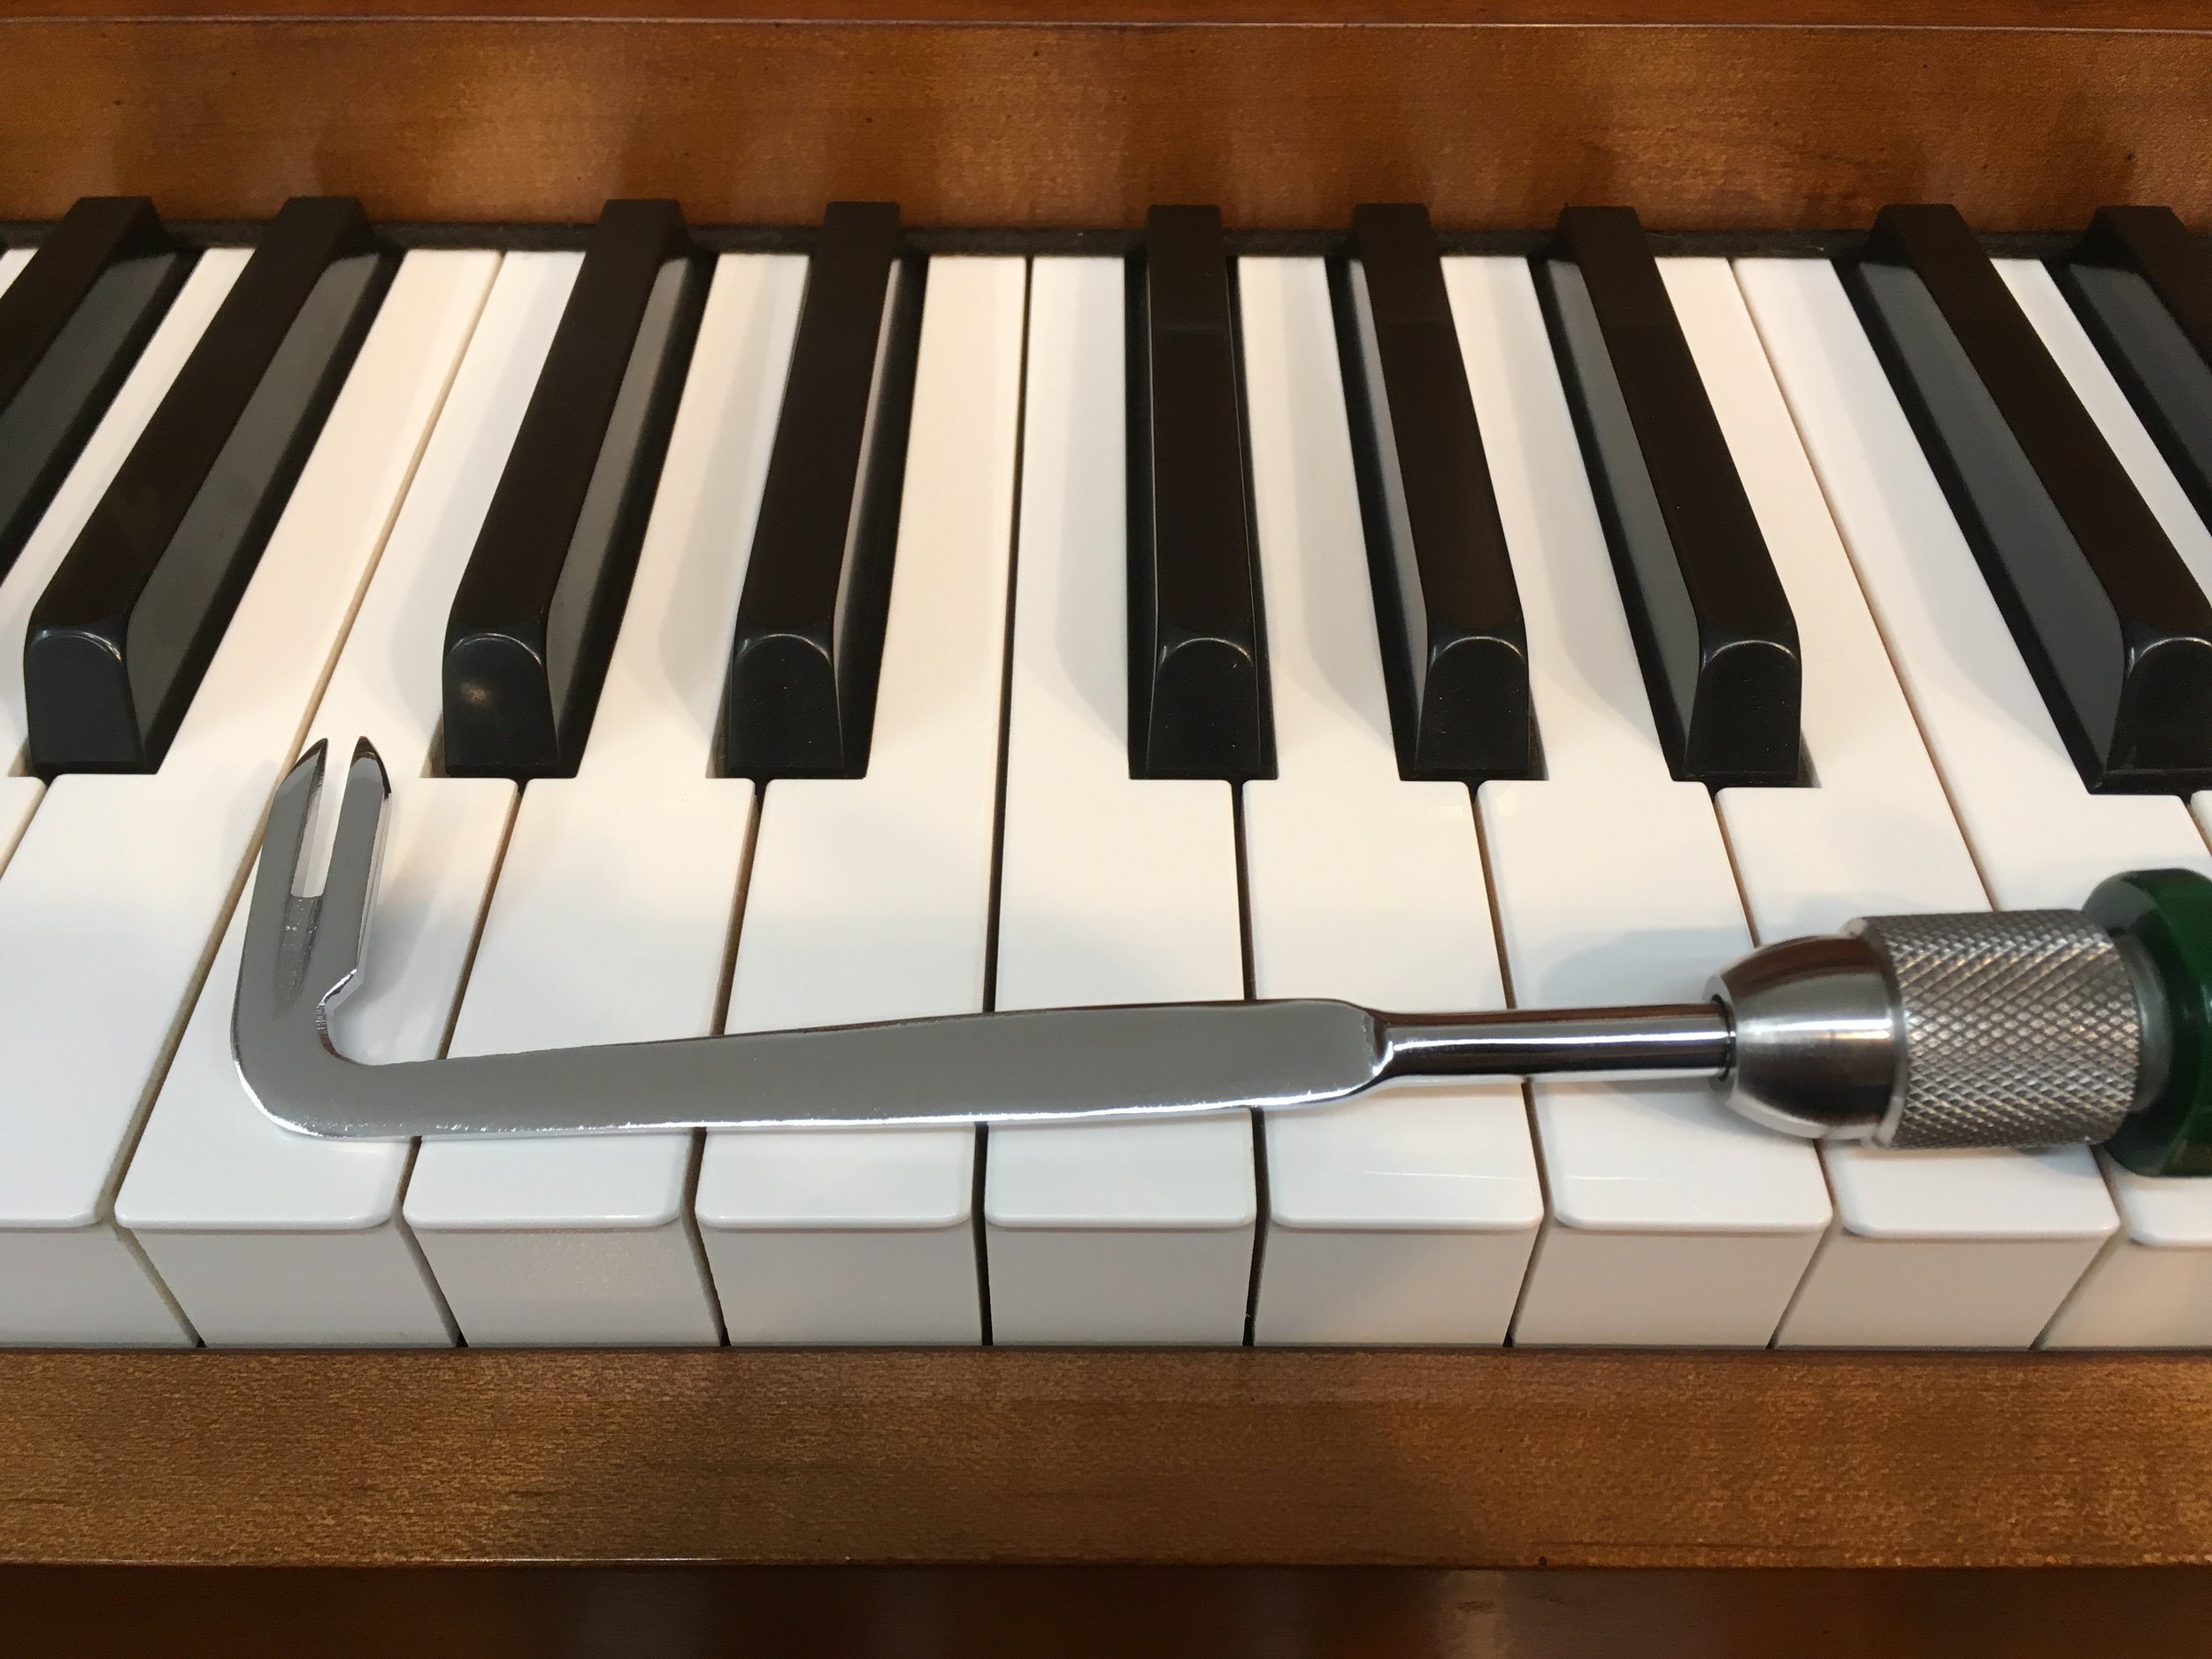 12" Gemm Piano Damper Spoon Bender Spinet - Chrome Plated 